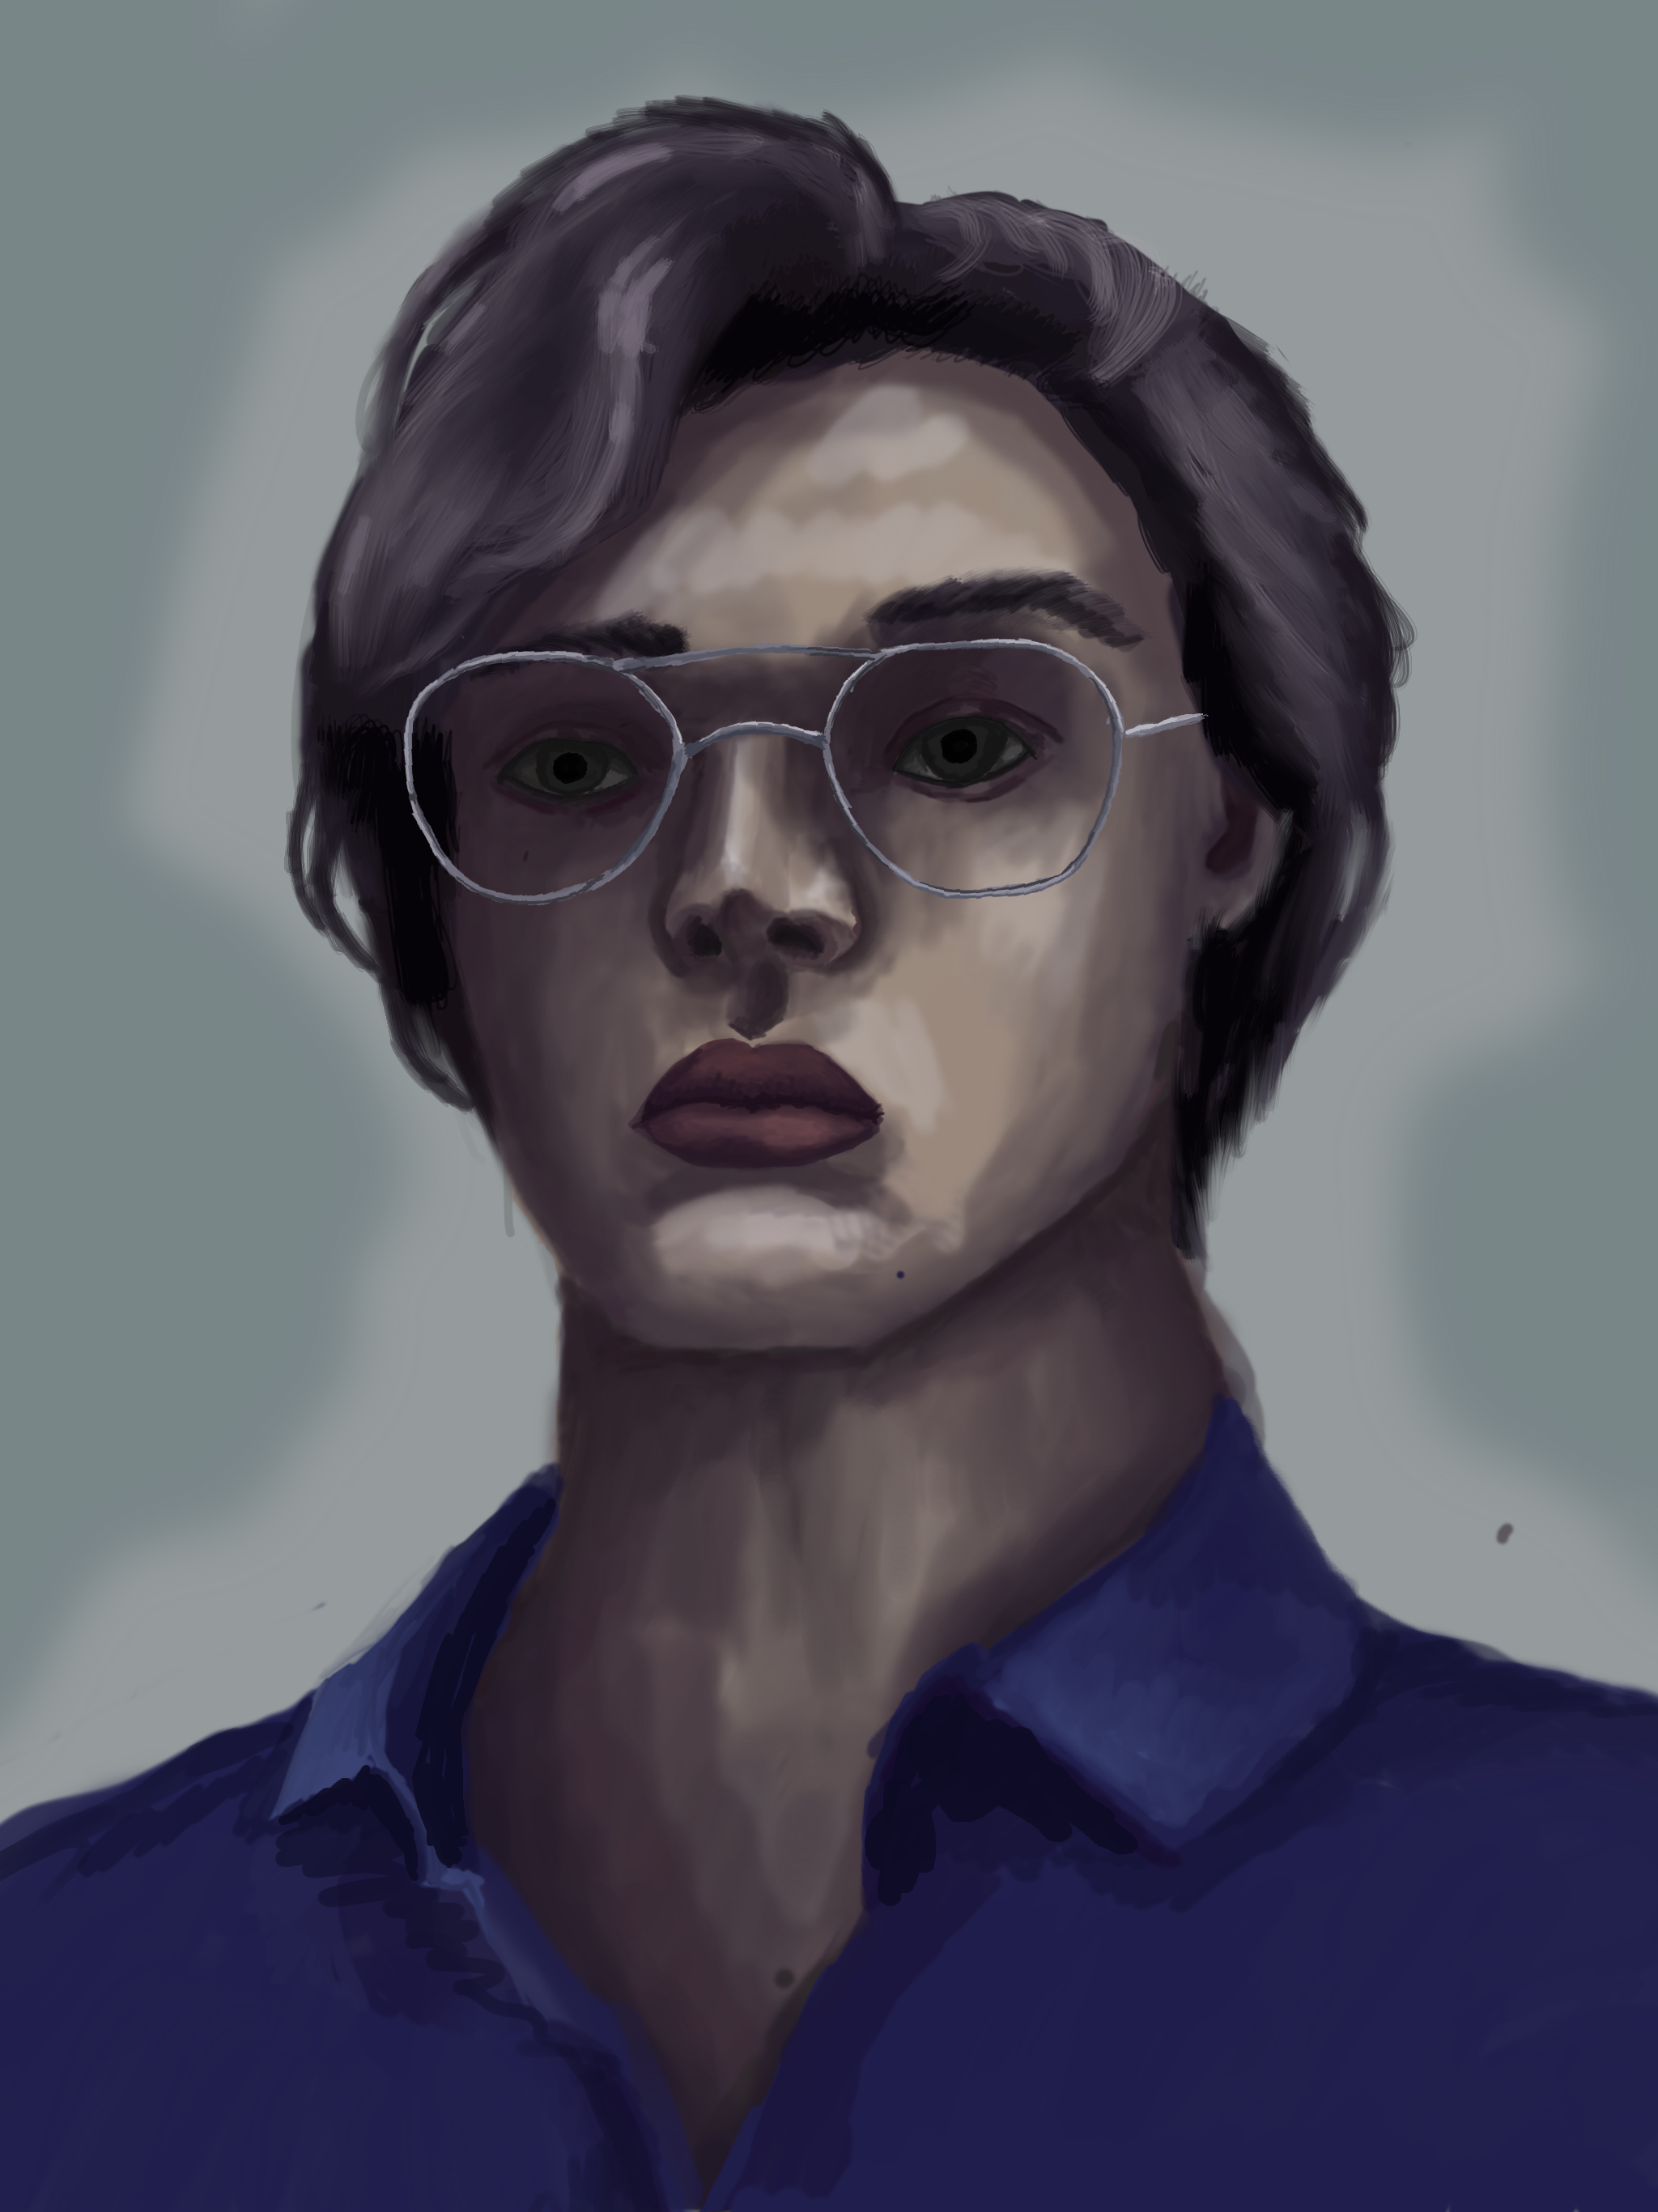 Guy with Glasses